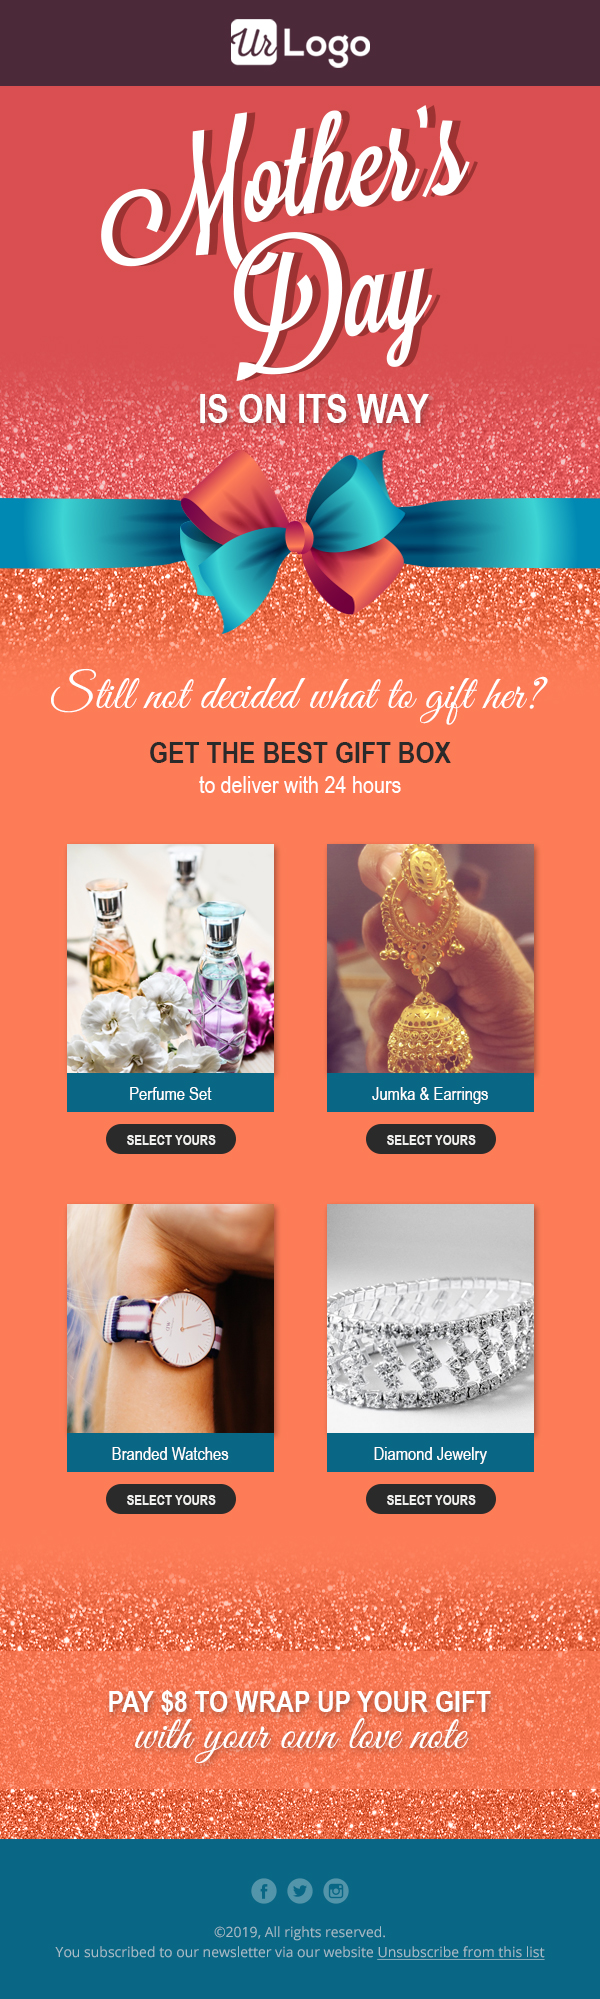 Download Free Responsive HTML Email Template | QeInbox